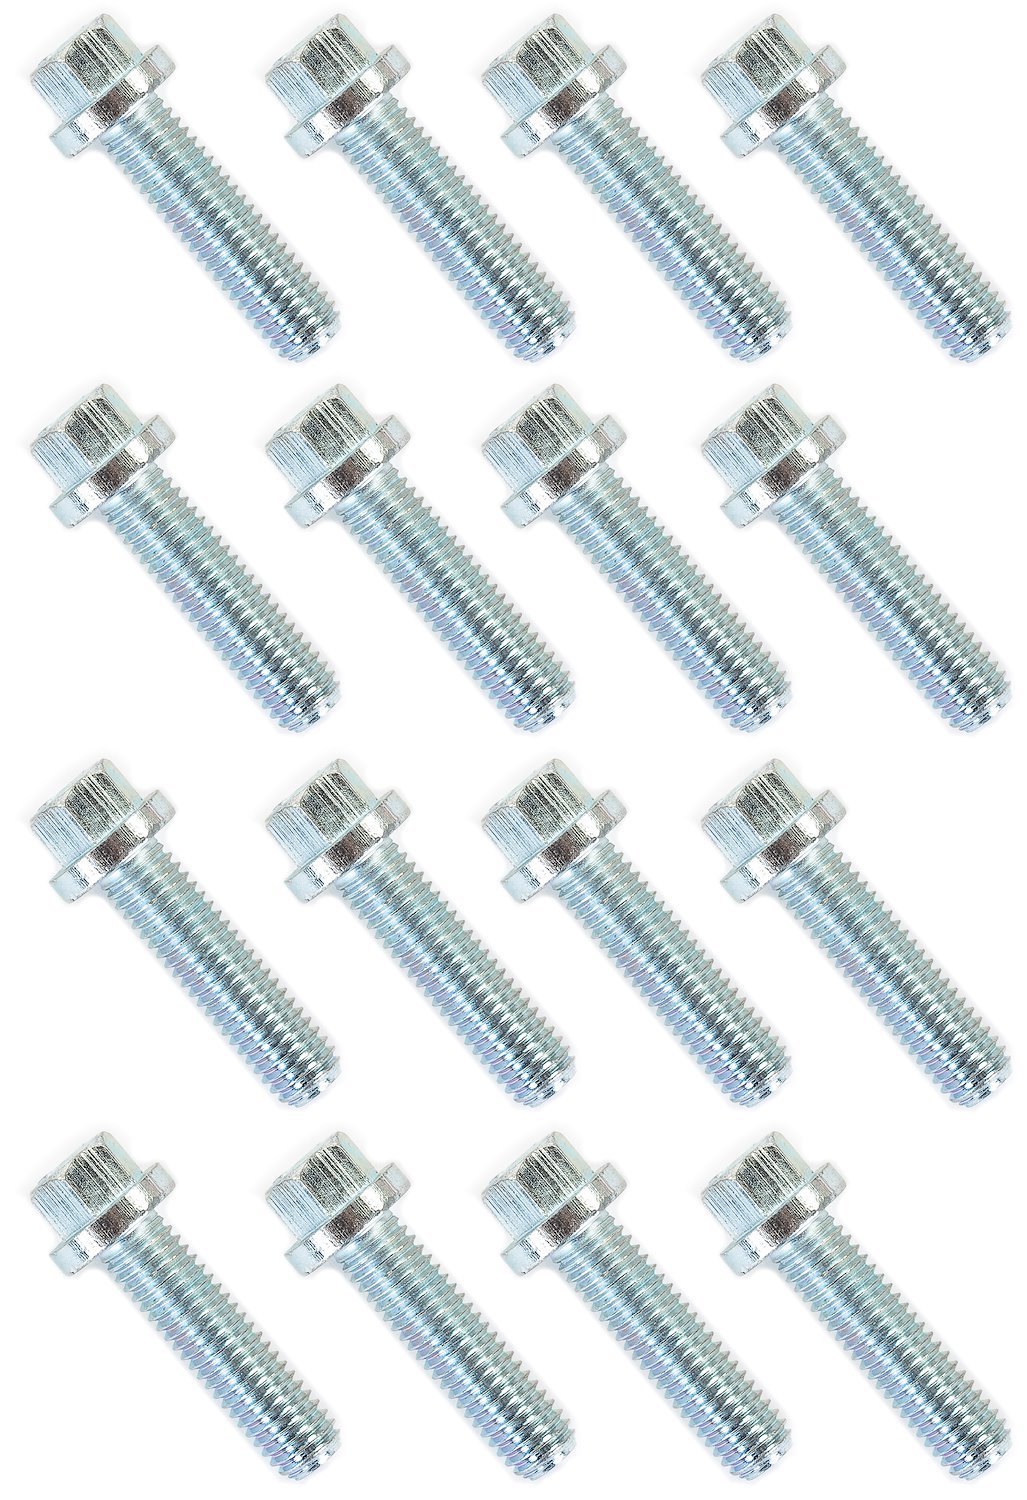 JEGS 30713: M8 x 1.25 Header Bolt Kit, Hex Head, 30mm Long for Ford Modular  and Chevy LS Engines - JEGS